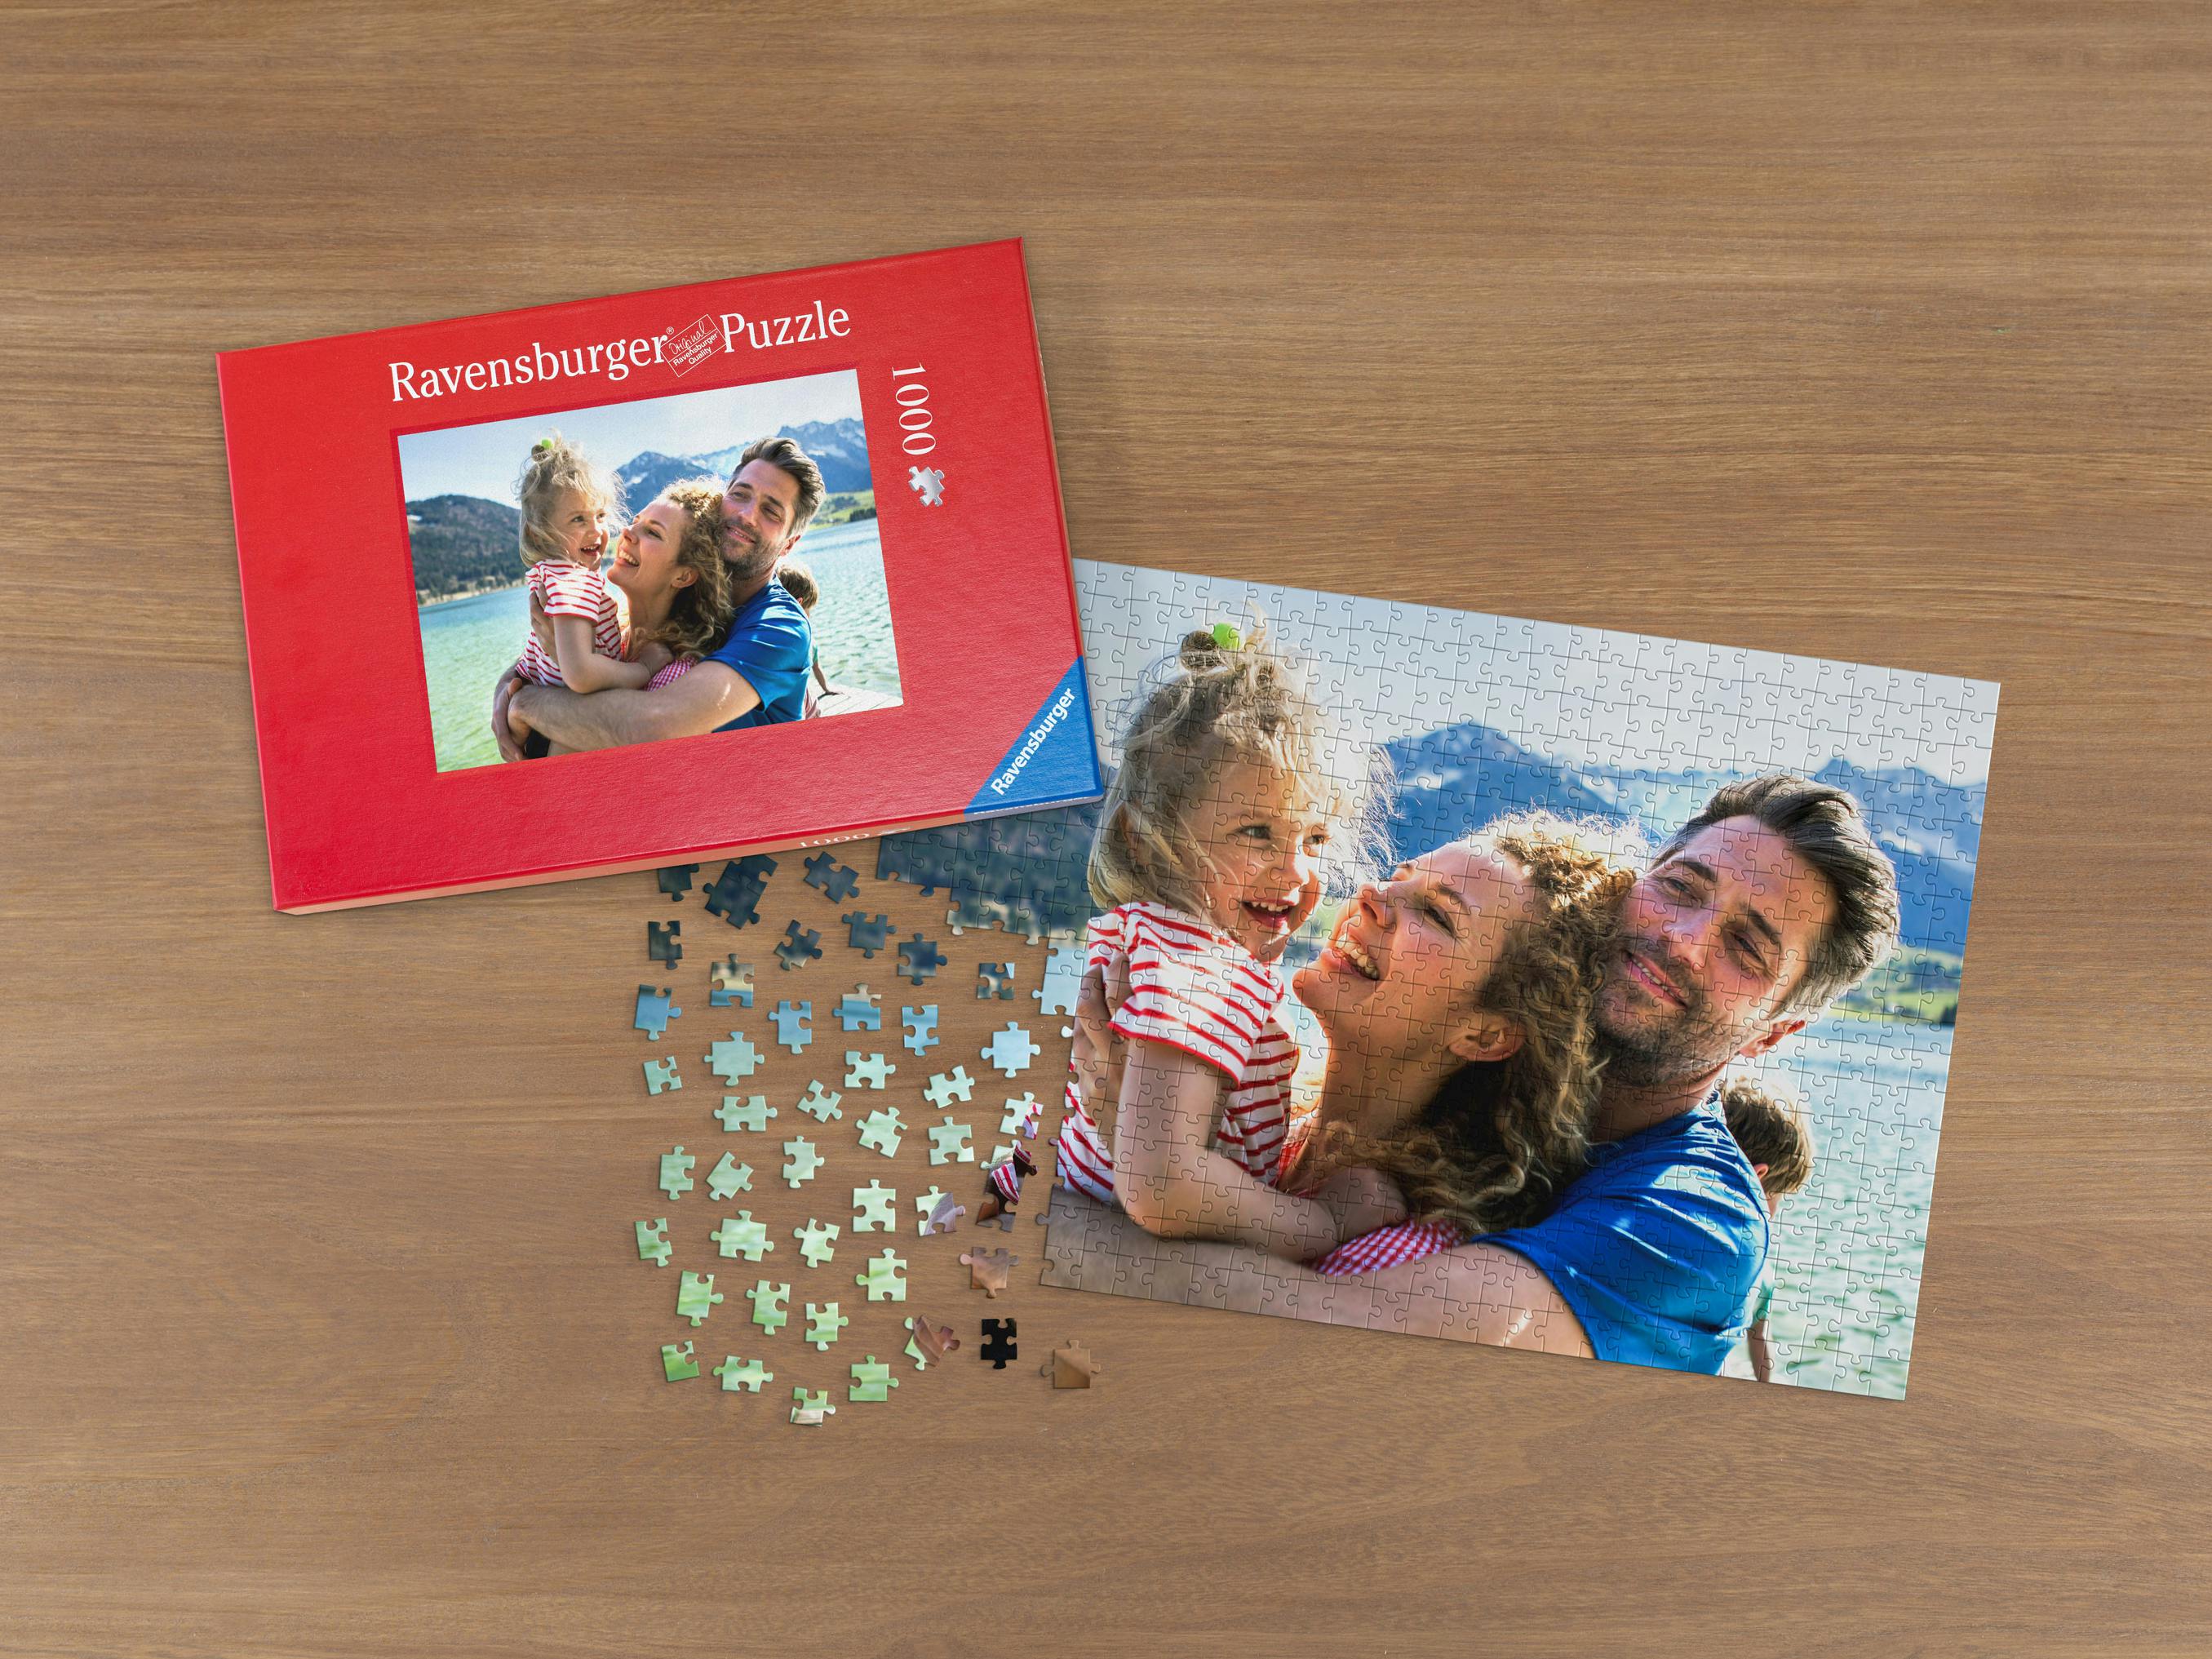 Ravensburger Photo puzzle with 1,000 pieces on a table with a holiday photo of a family by a lake near the mountains